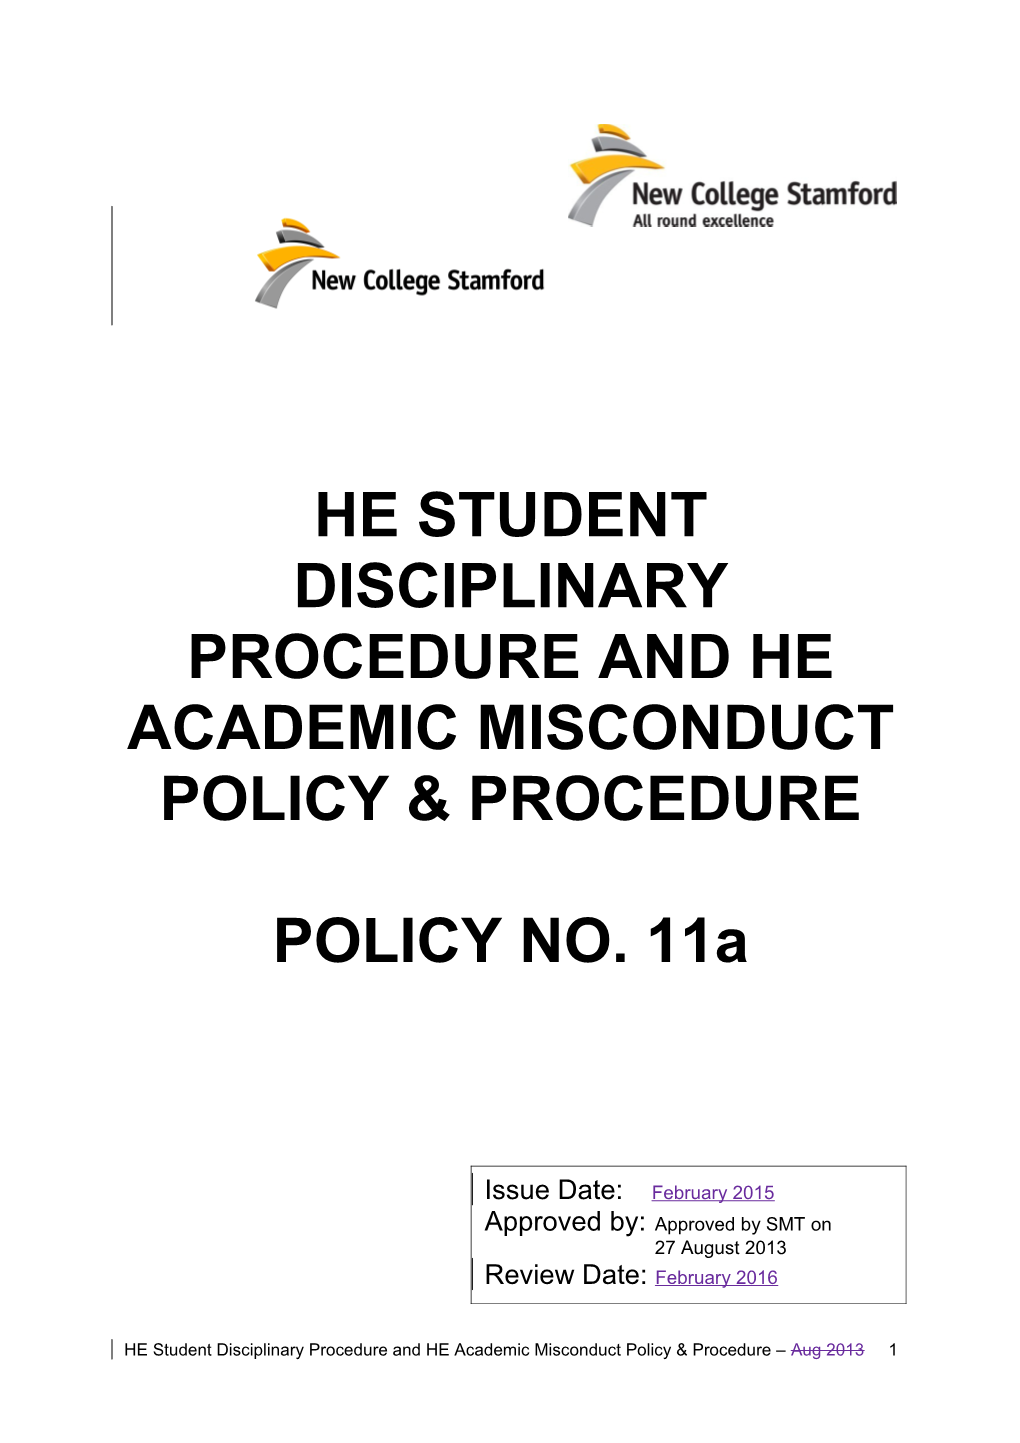 He Student Disciplinary Procedure and He Academic Misconduct Policy & Procedure